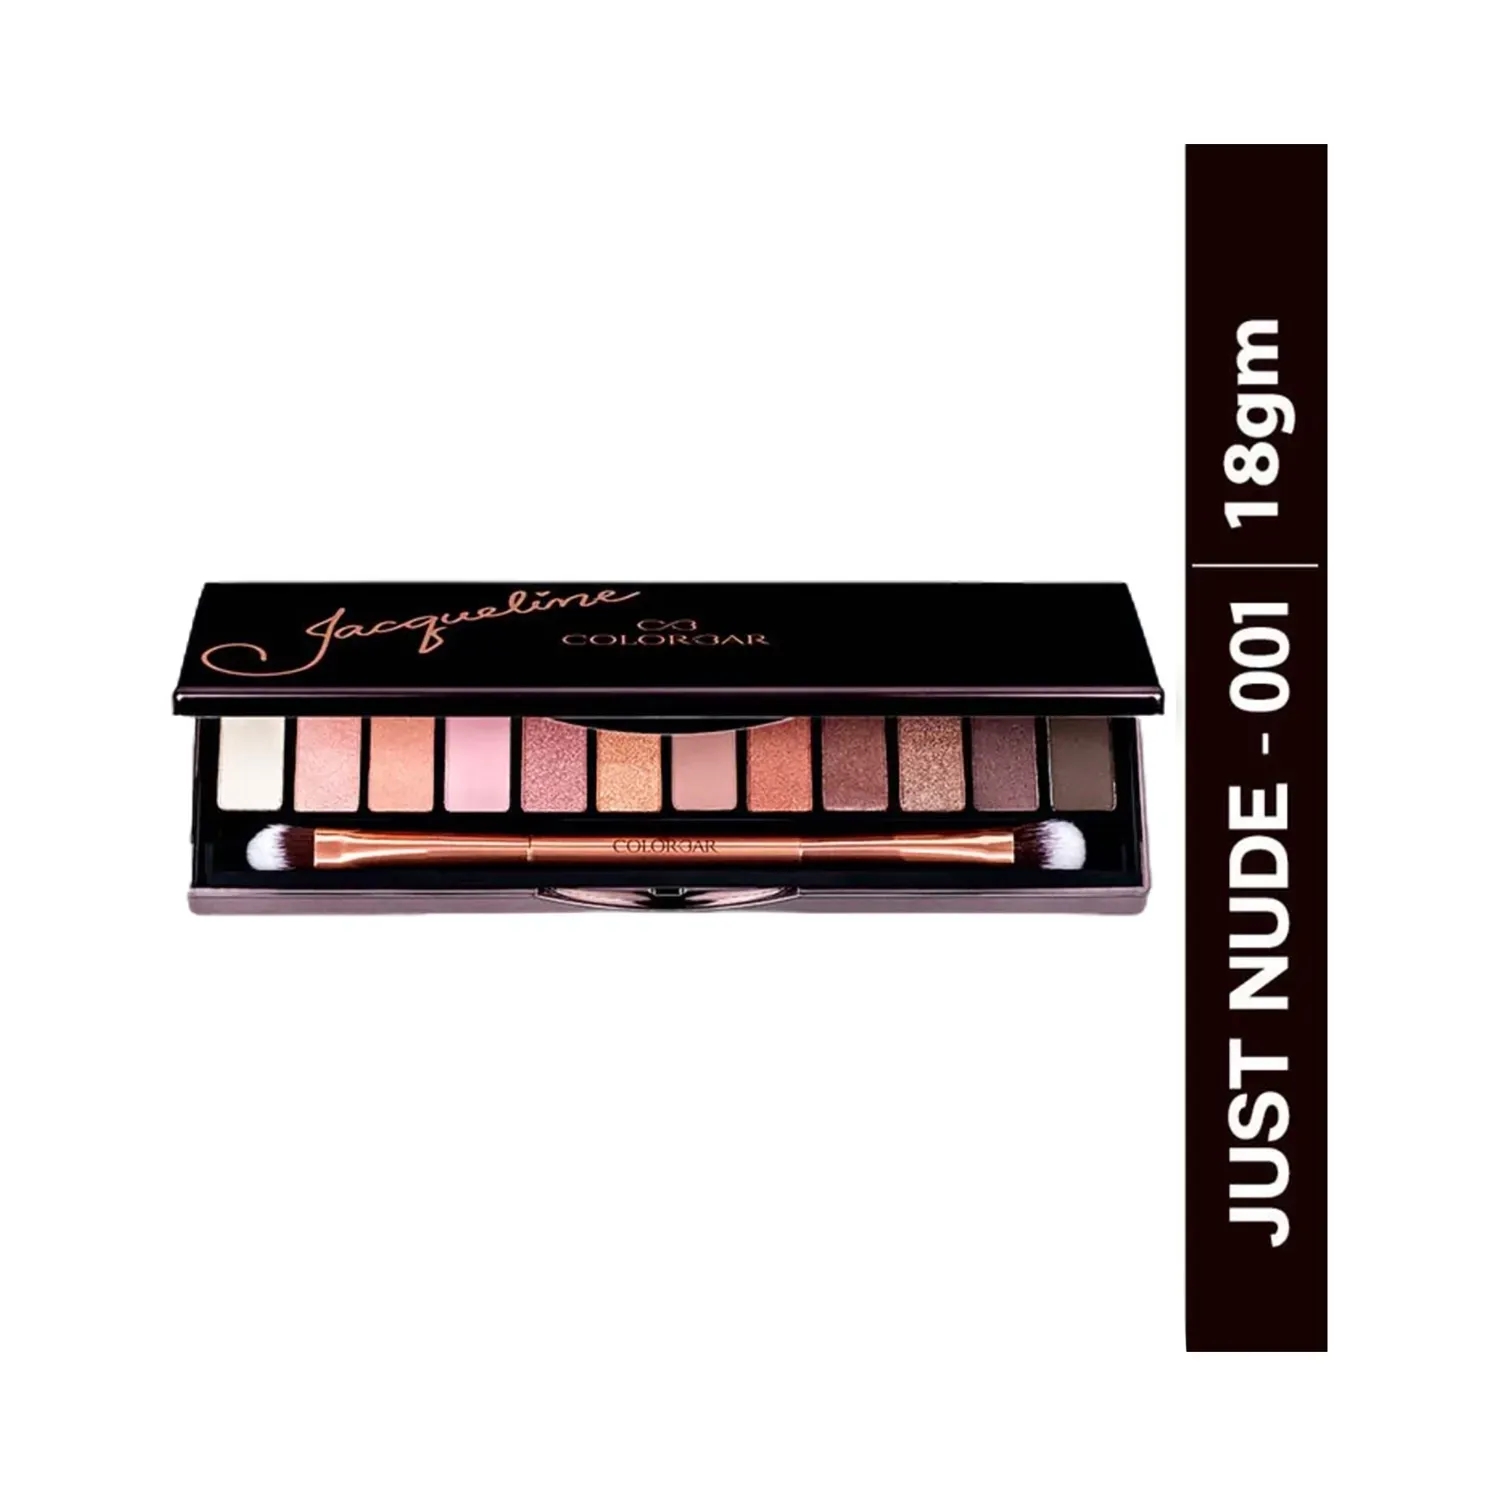 Colorbar | Colorbar Jacqueline Eyeshadow Palette - 001 Just Nude (18g)